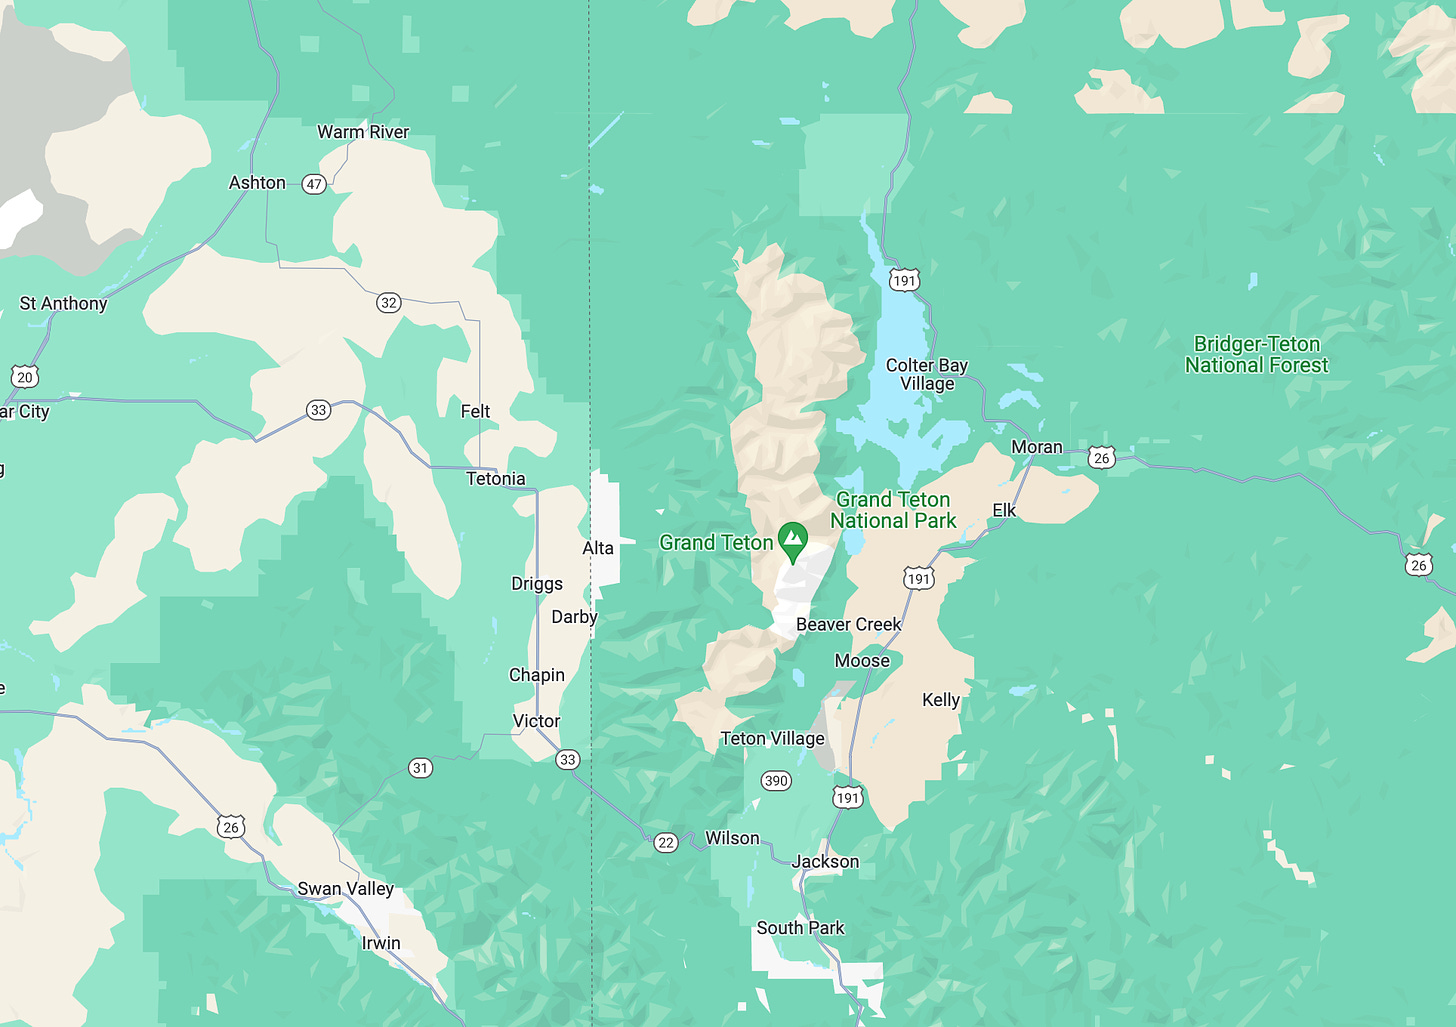 View of the map of Grand Teton National Park from Google Maps